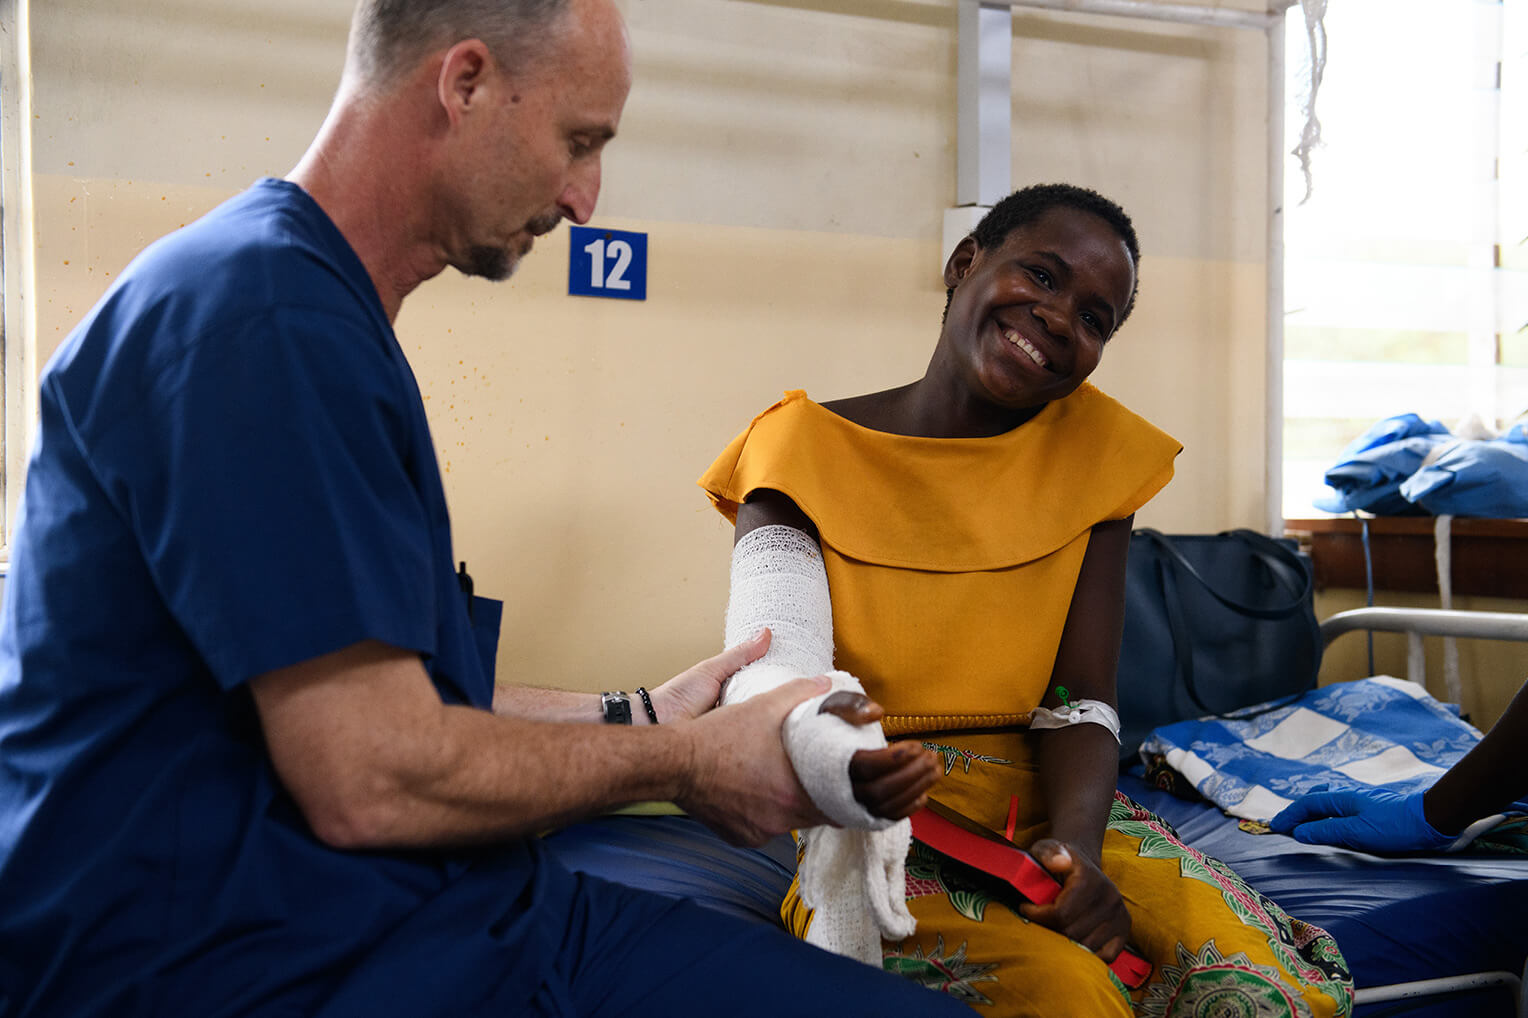 Kemp Laidley, a physical therapist with Samaritan's Purse, helps Ireen after her surgery. Despite the pain, Ireen still smiles.